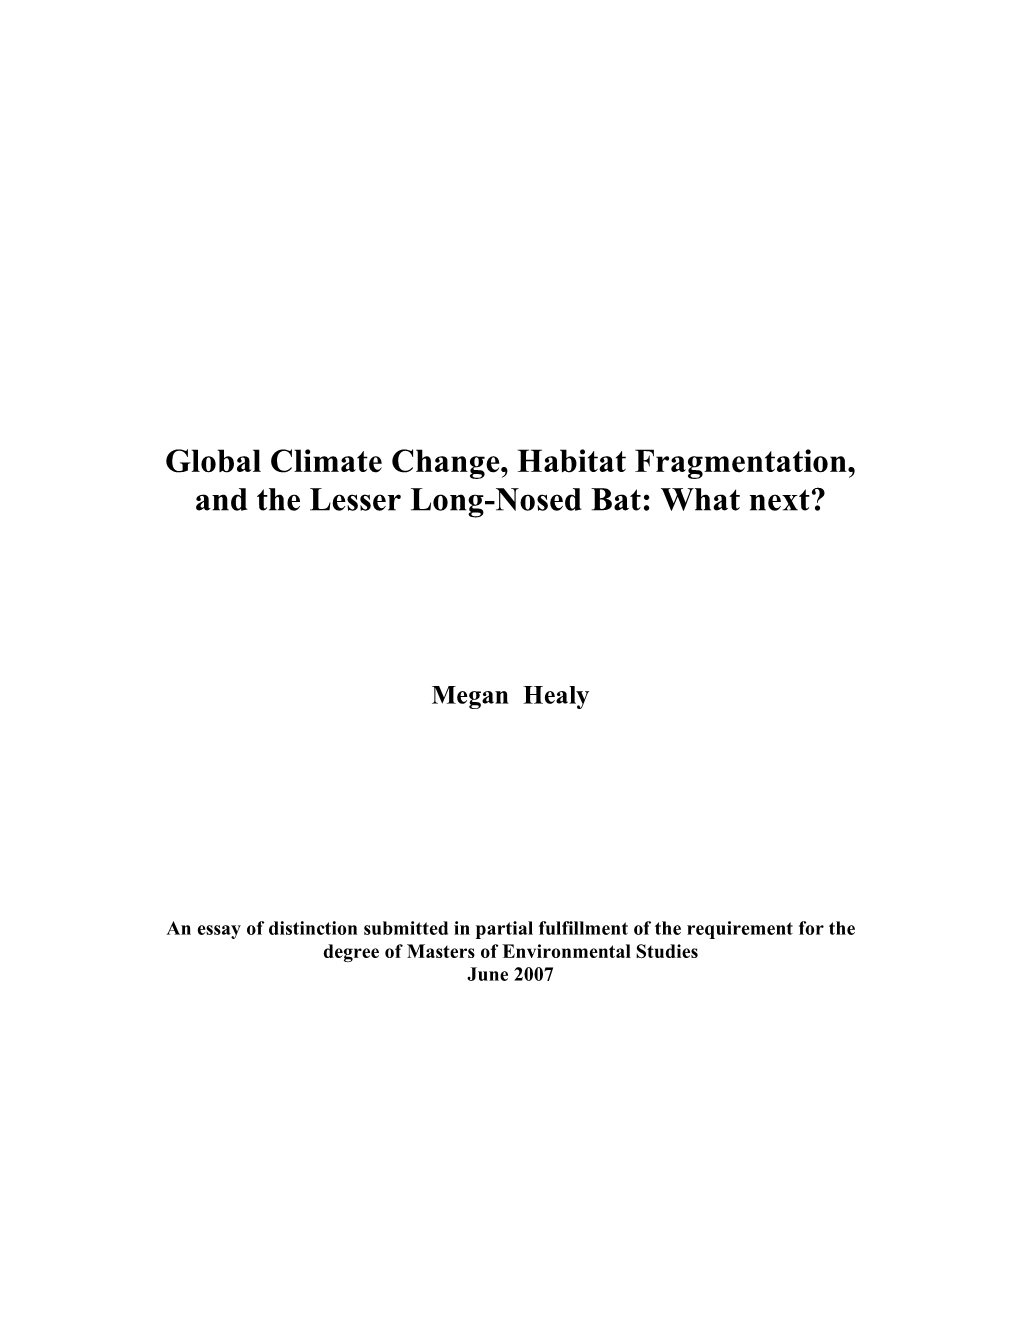 Global Climate Change, Habitat Fragmentation, and the Lesser Long-Nosed Bat: What Next?